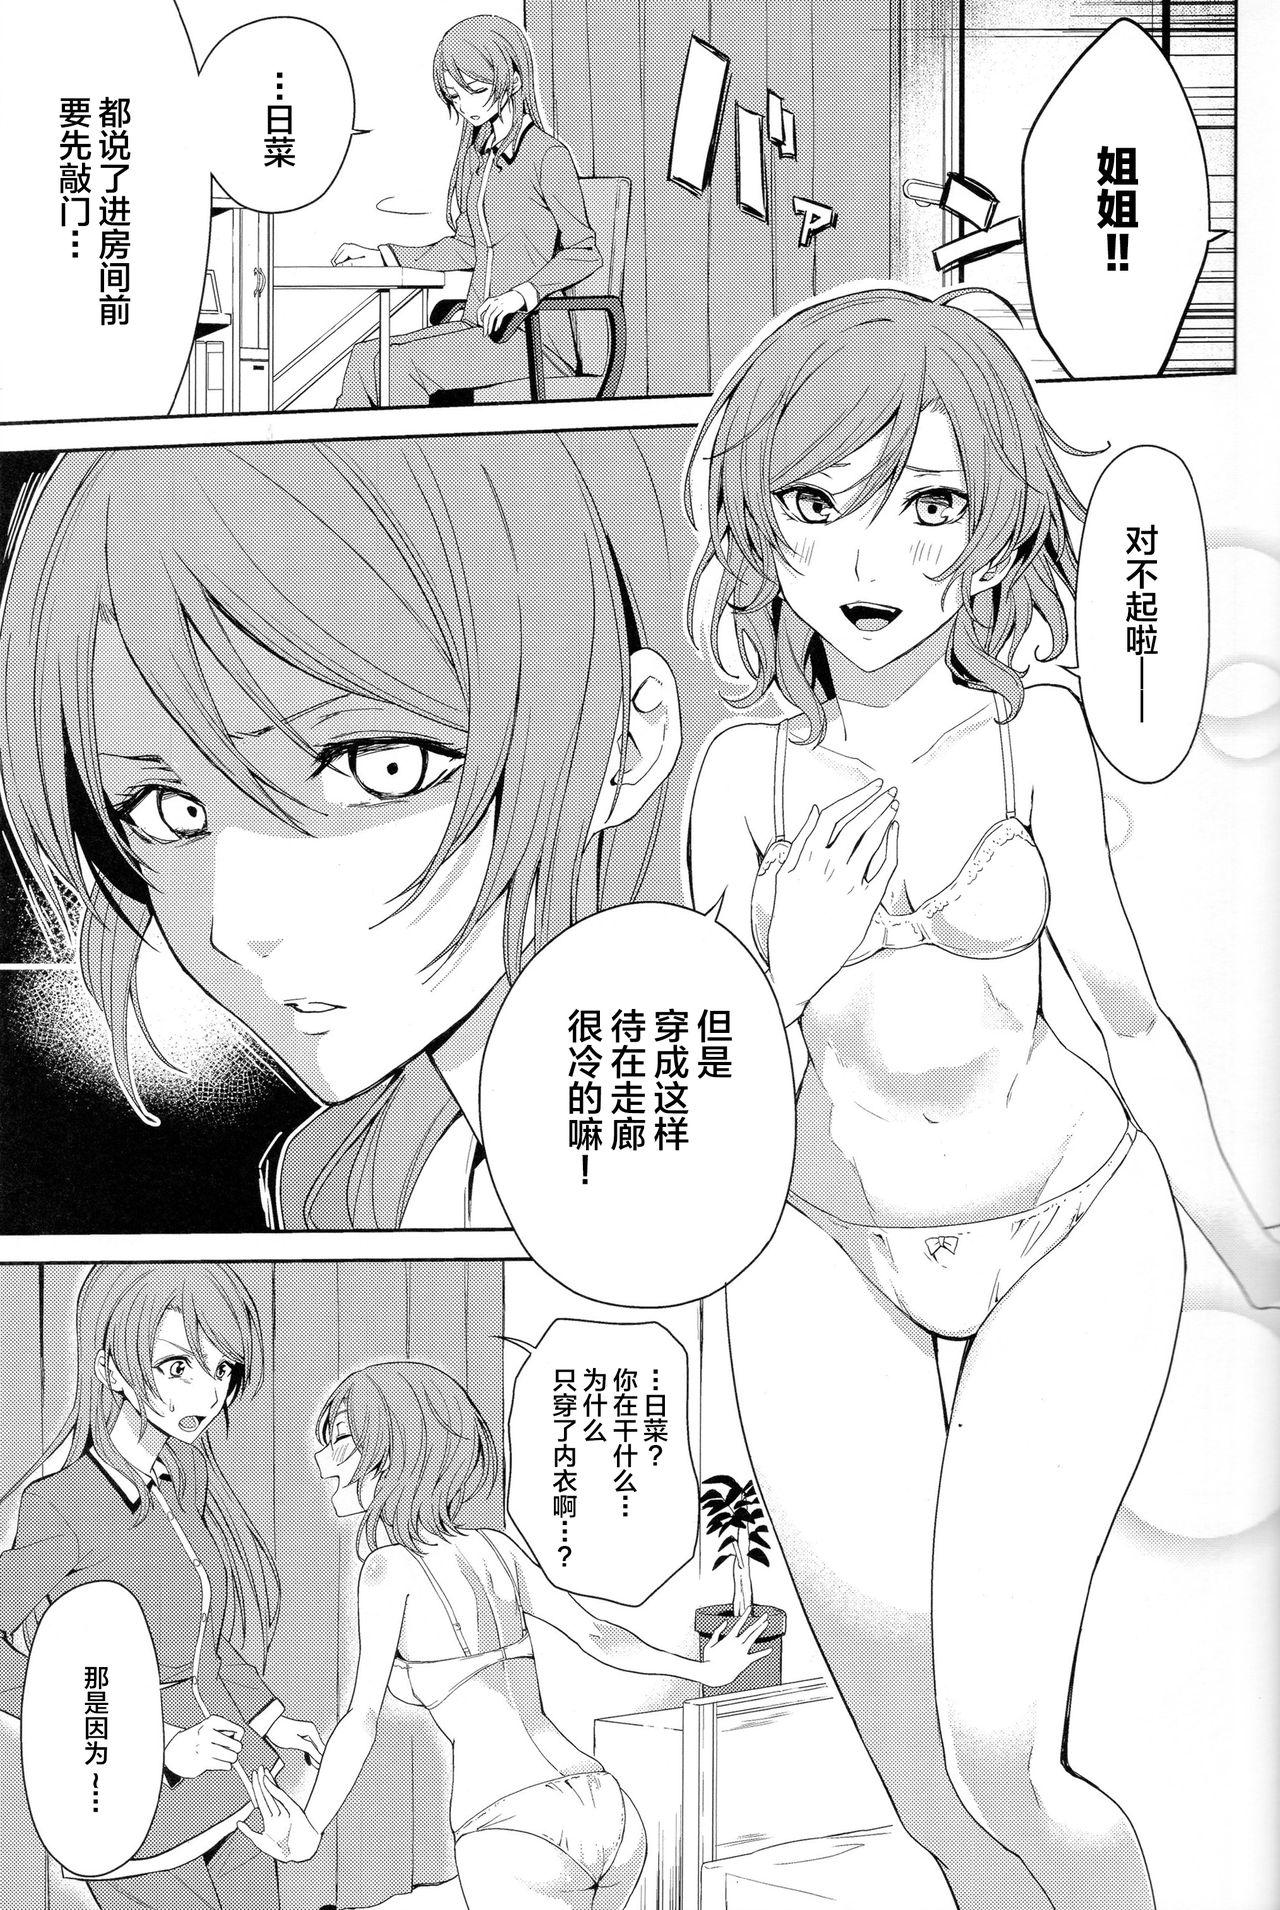 Family Onee-chan to! - Bang dream Staxxx - Page 2